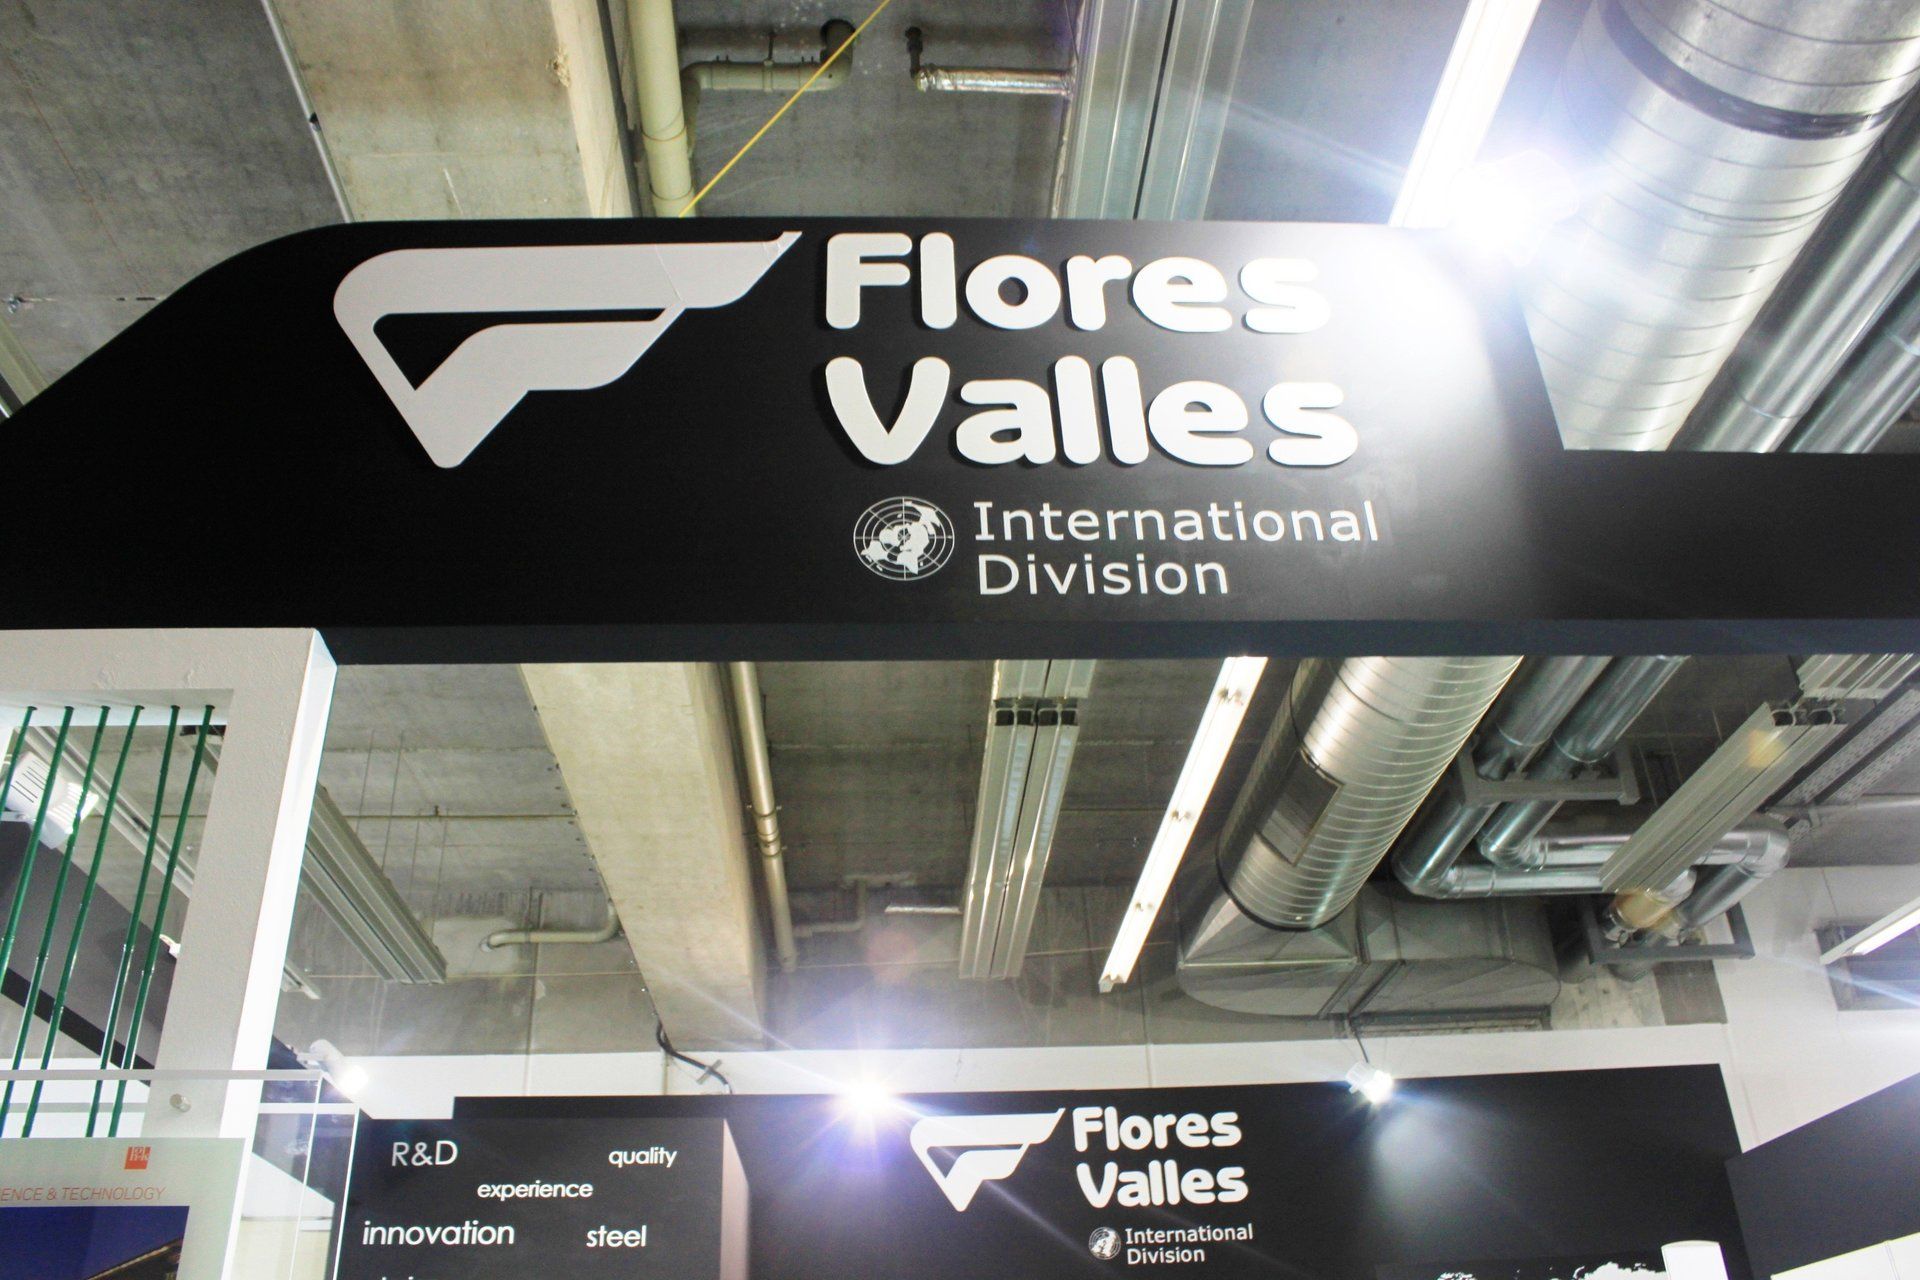 Flores Valles @ Achema 2012. Booth designed and built by Essential Global Fairs.